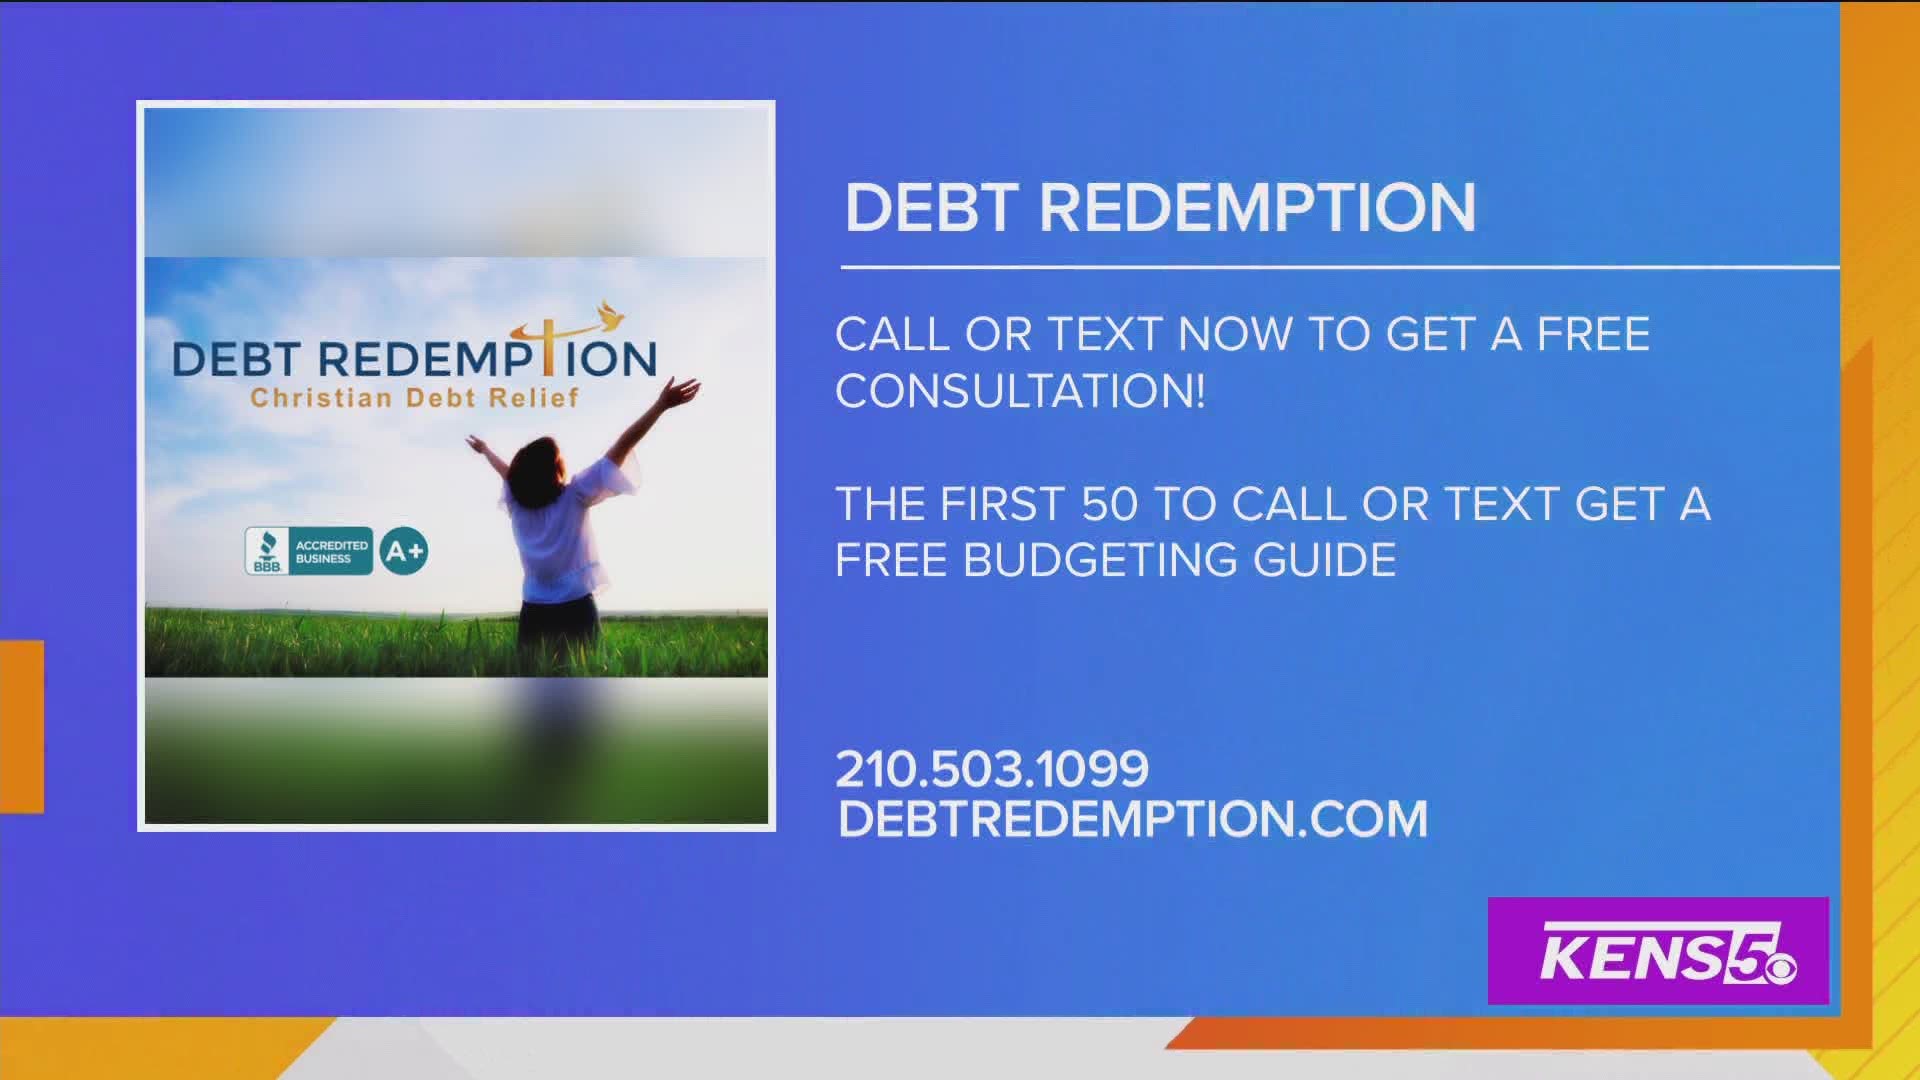 If you're feeling overwhelmed by credit card debt, Debt Redemption could be the perfect credit counseling resource to fit your needs.